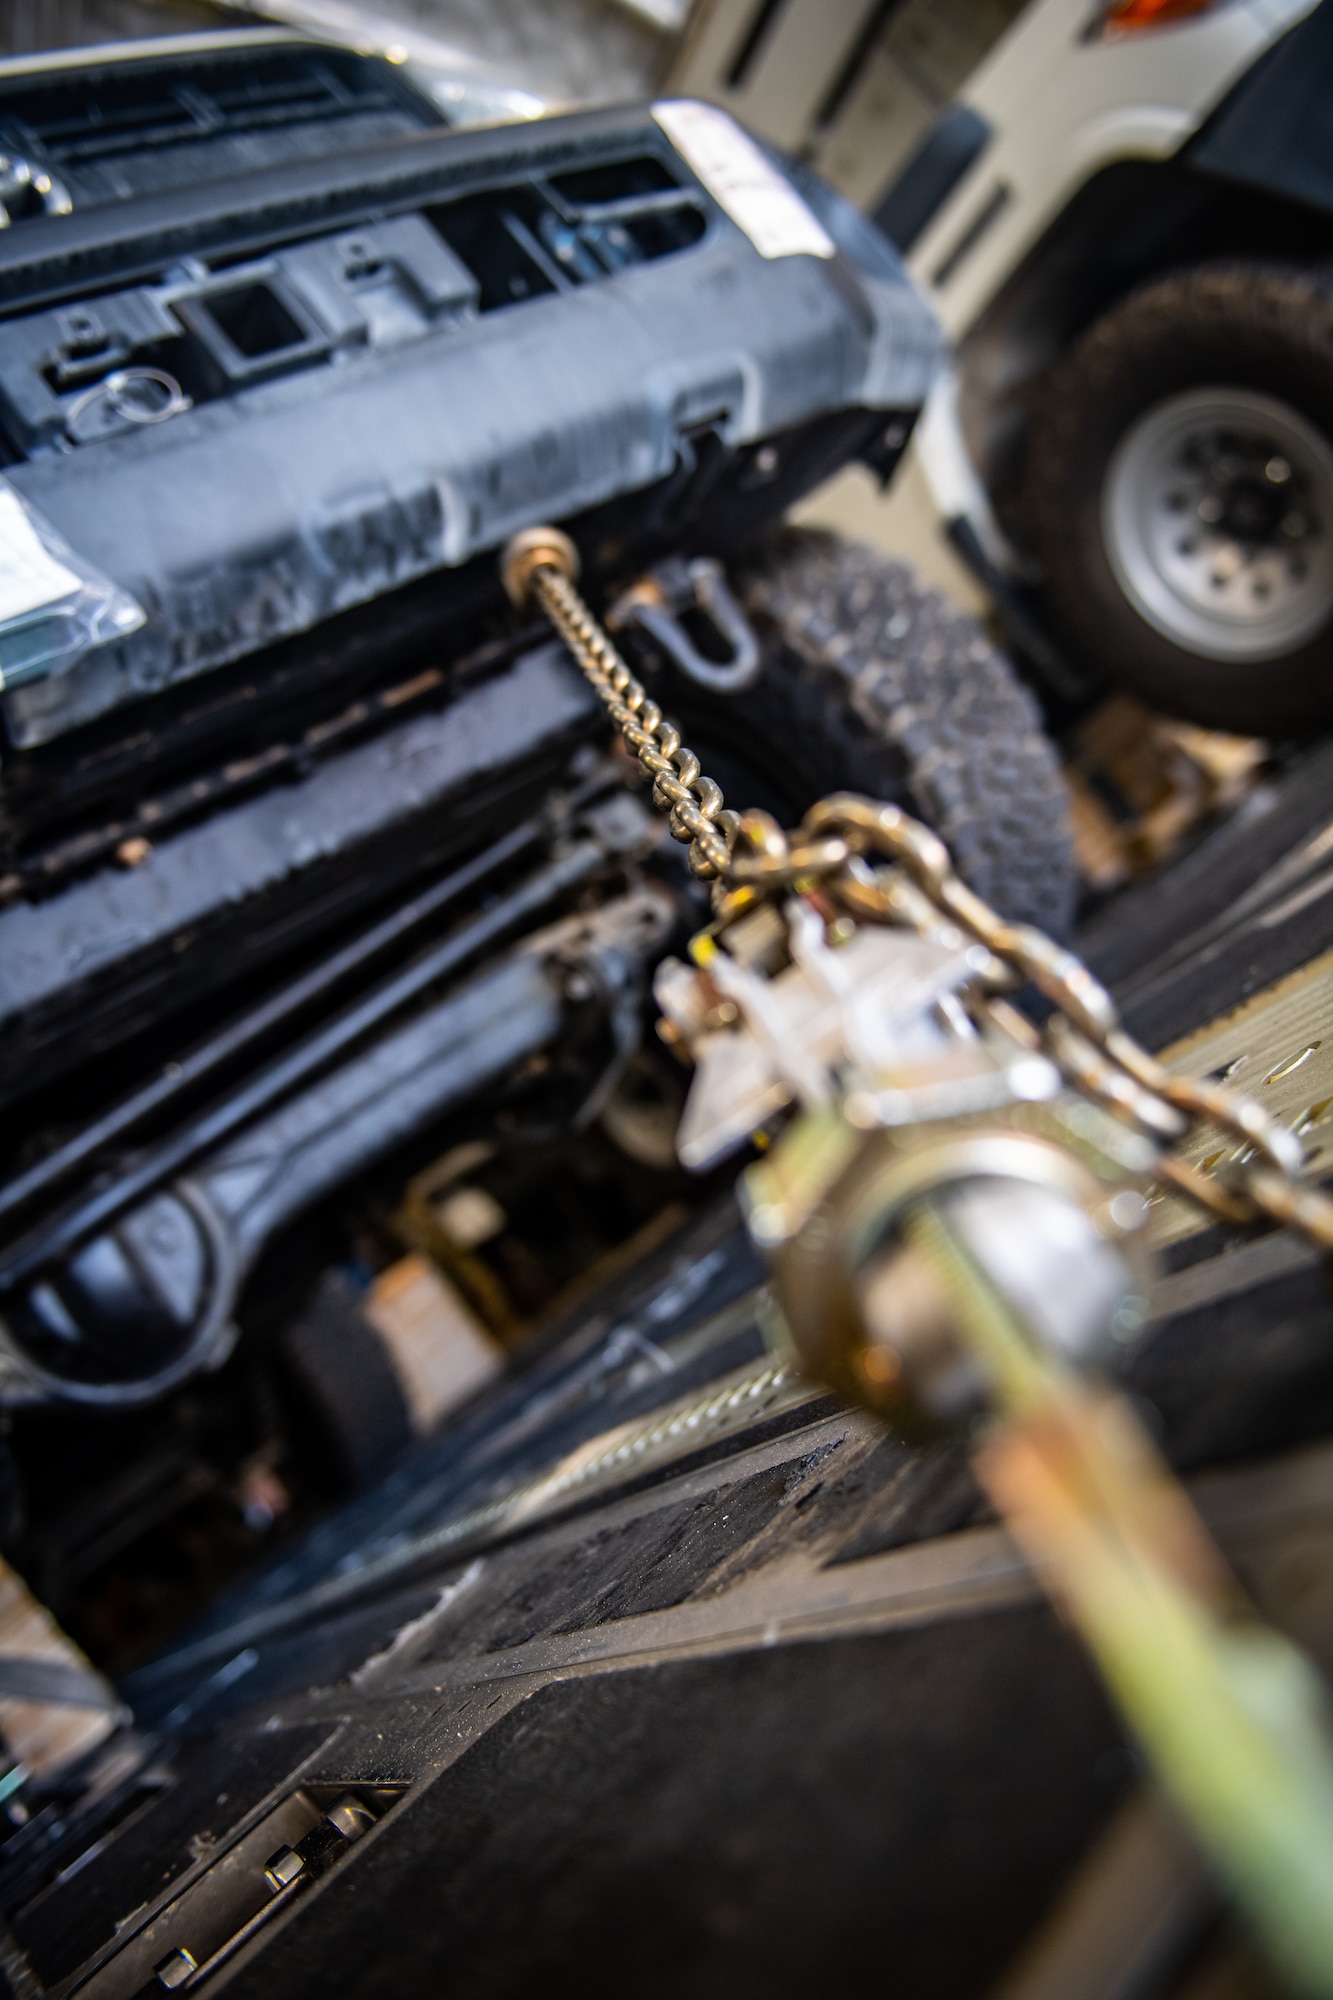 Chains used to secure cargo inside a U.S. Air Force C-17 Globemaster III during flight are disconnected prior to unloading in Jordan, Oct. 14, 2019. The port provides aerial logistics for the American Embassy to Jordan through the Military Assistance Program, handling cargo and passenger movement in support of State Department efforts.